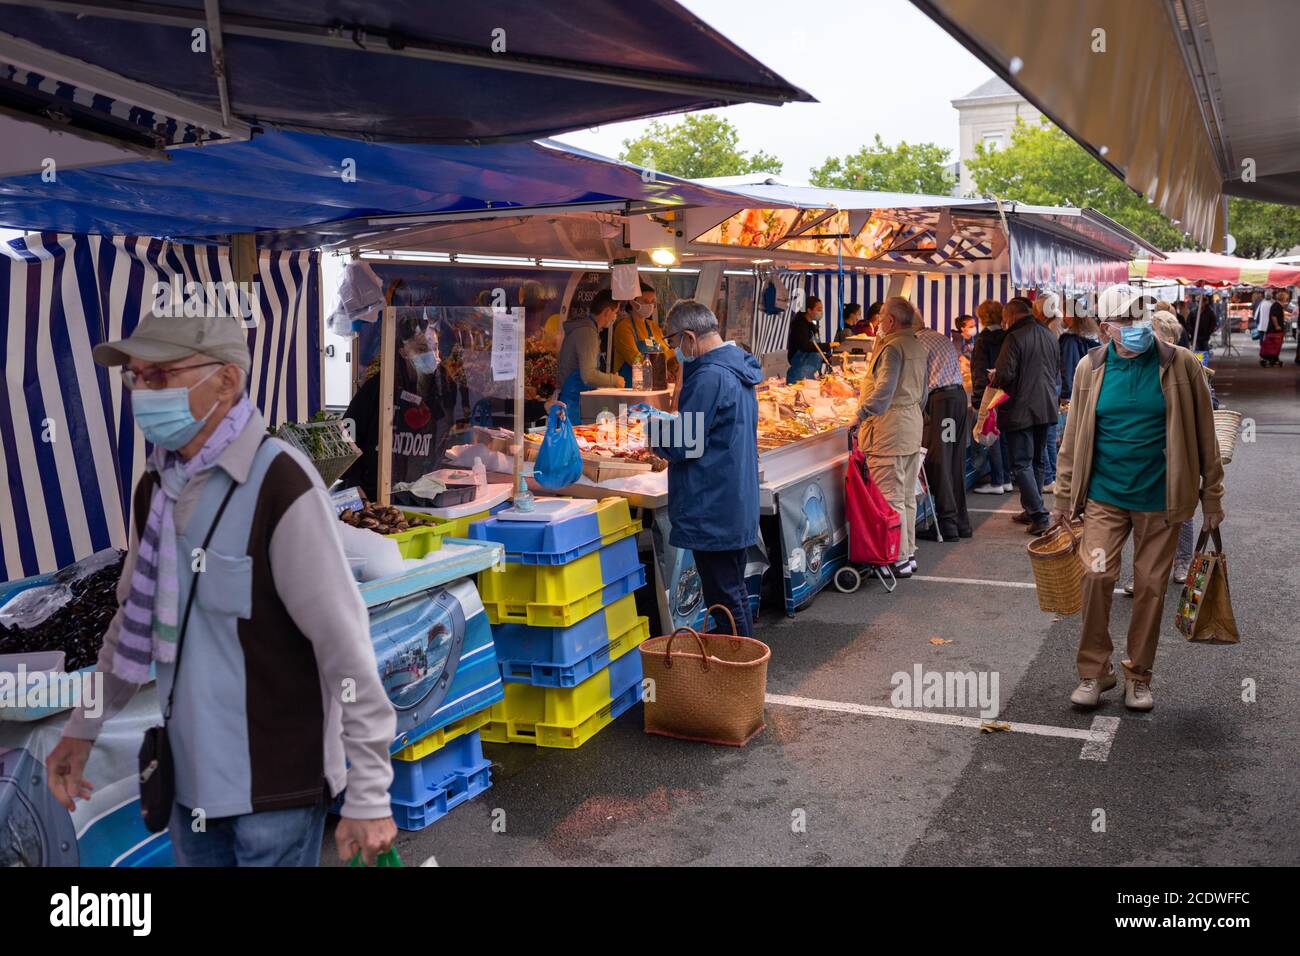 Angers, France - August 29 2020: people wearing face protective mask while shopping in the market place at France to prevent coronavirus, concept of wearing masks outdoor is mandatory, protection solutions, respect mask mode Stock Photo